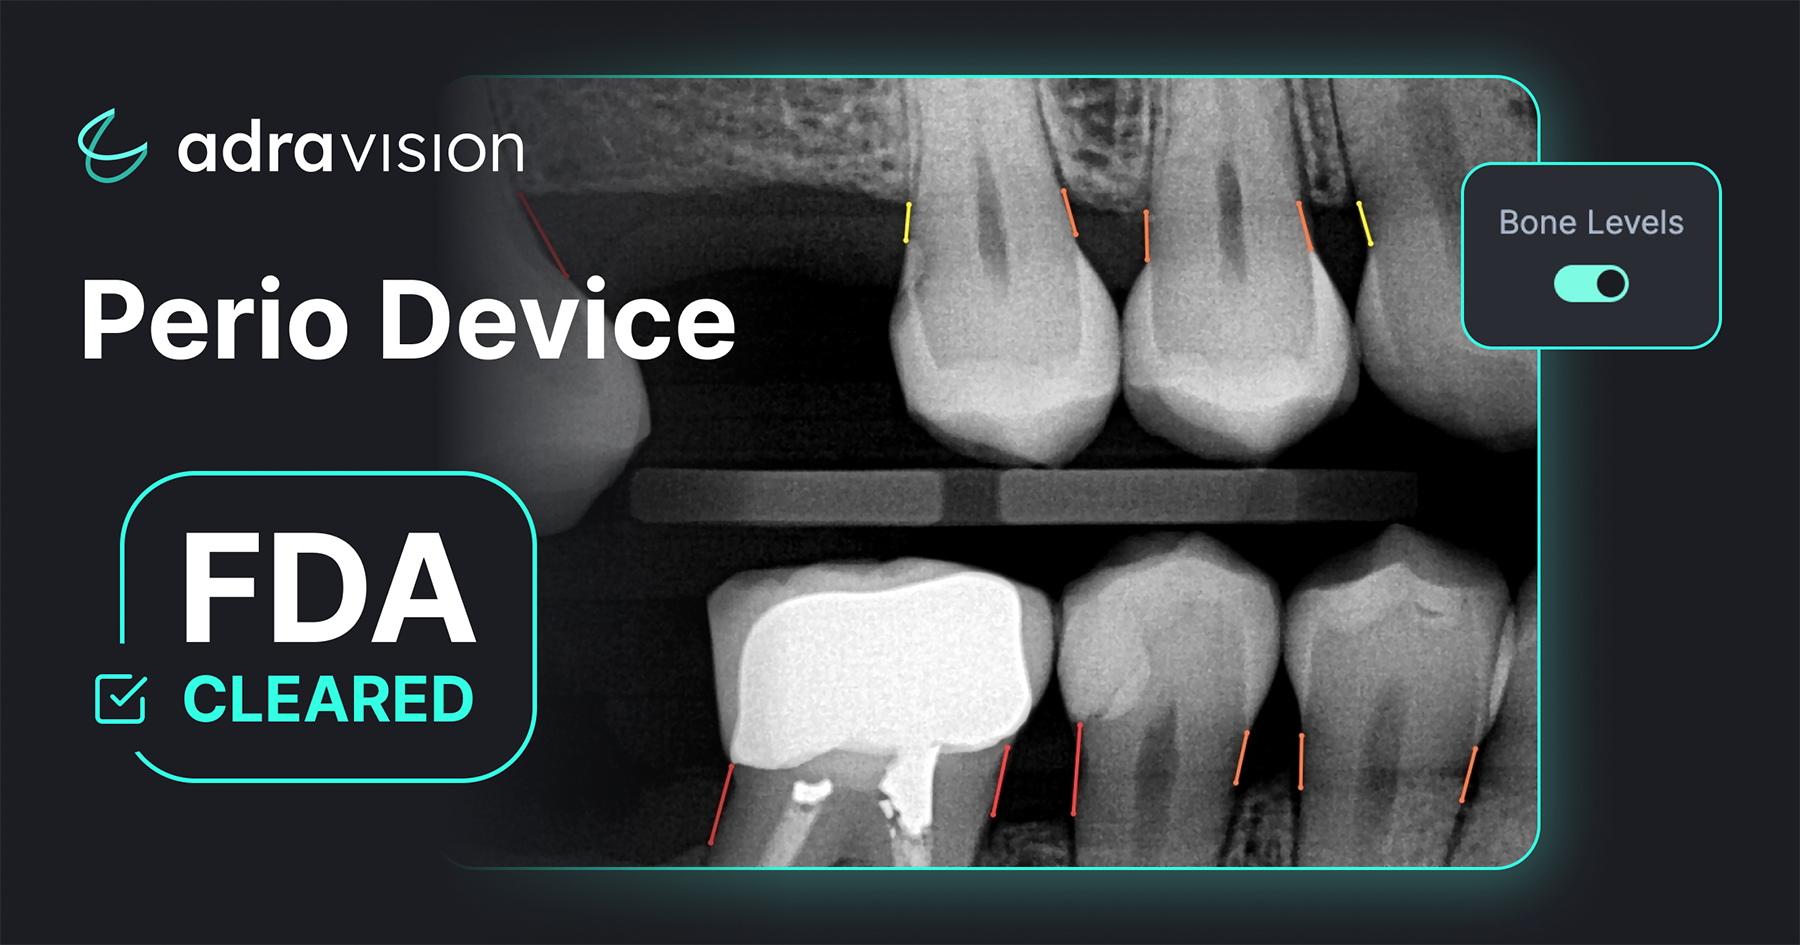 Adravision Secures FDA Clearance for AI-driven Dental Image Enhancement Technology | Image Credit: © Adravision